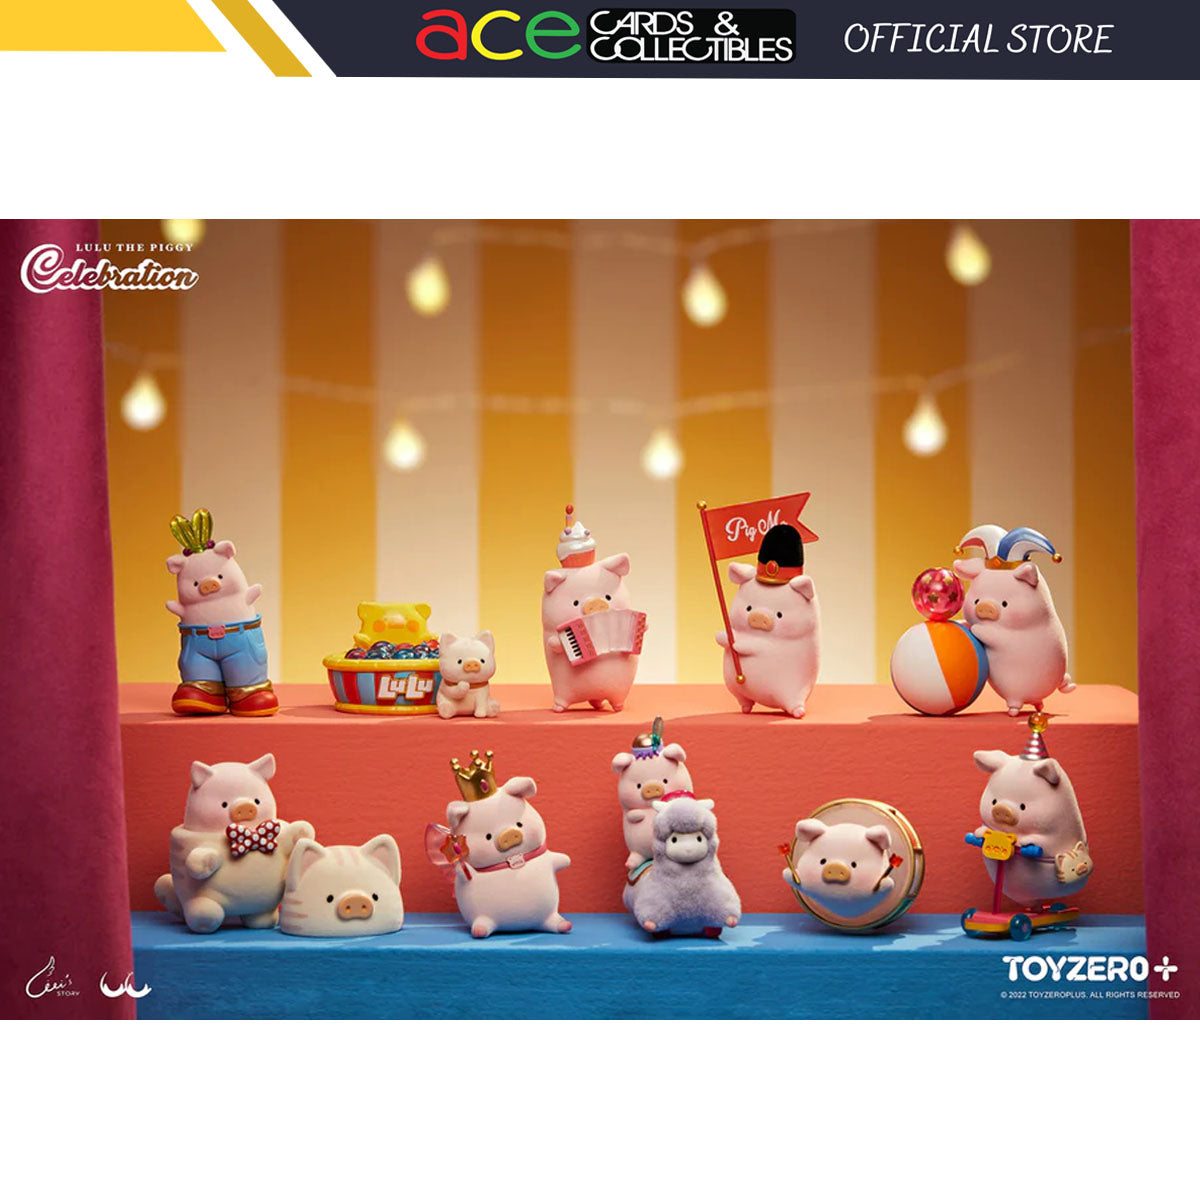 52TOYS Lulu The Piggy Celebration Series-Whole Display Box (8pcs)-Miniso-Ace Cards & Collectibles